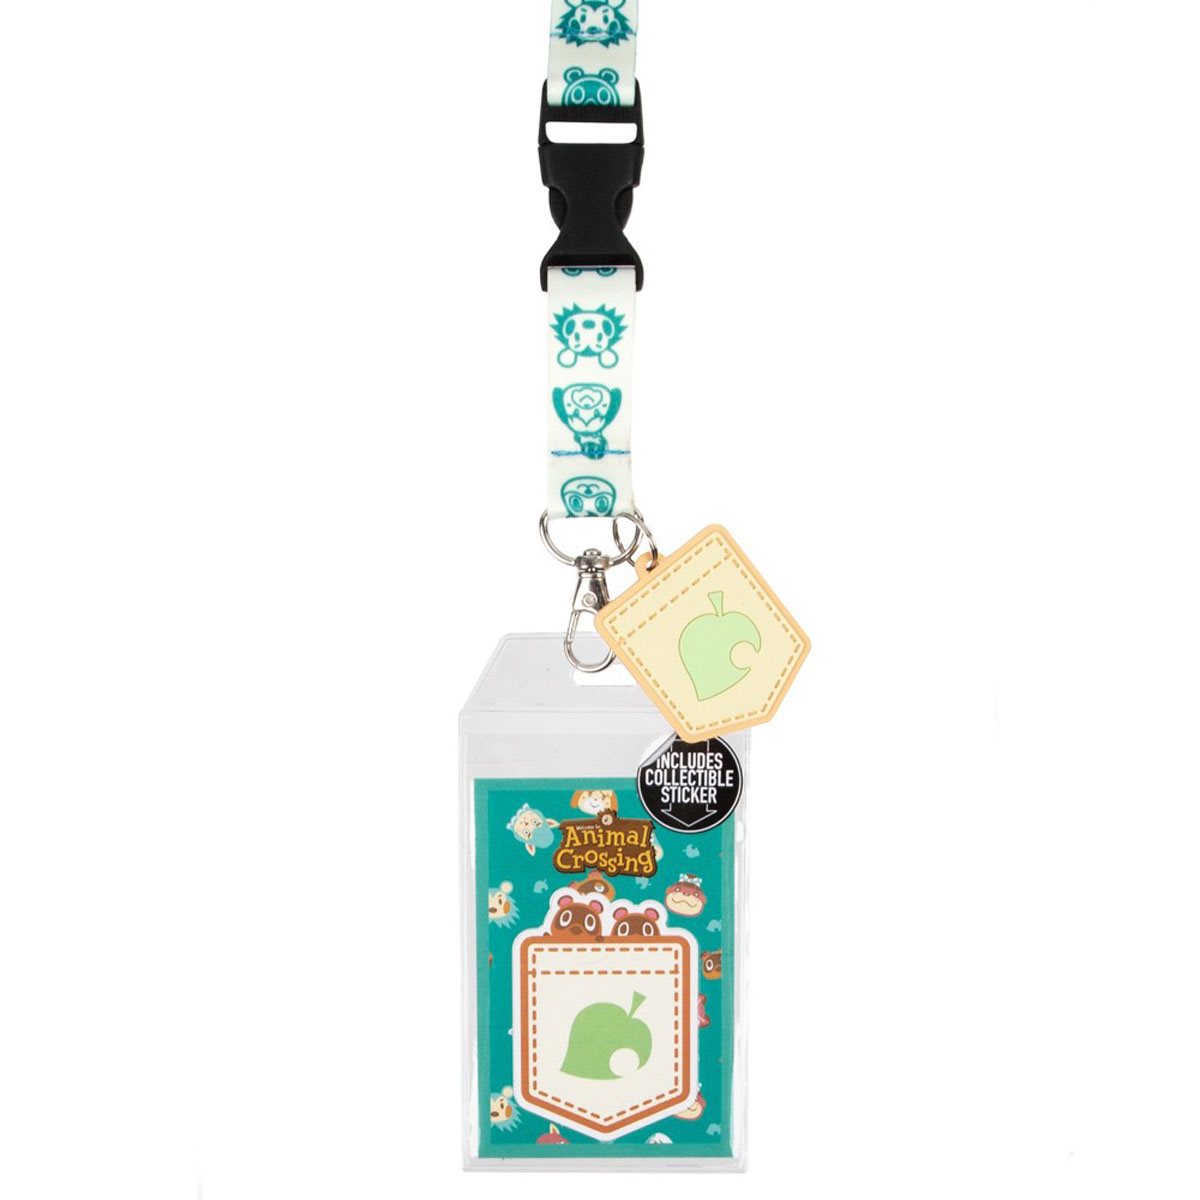 GTOTd Animal Crossing Lanyard with id Holder（2 Pack）for Keys Lanyard String Wallet Gifts Merch Animal Crossing Party Supplies Cute Lanyard for Teens Girls. 